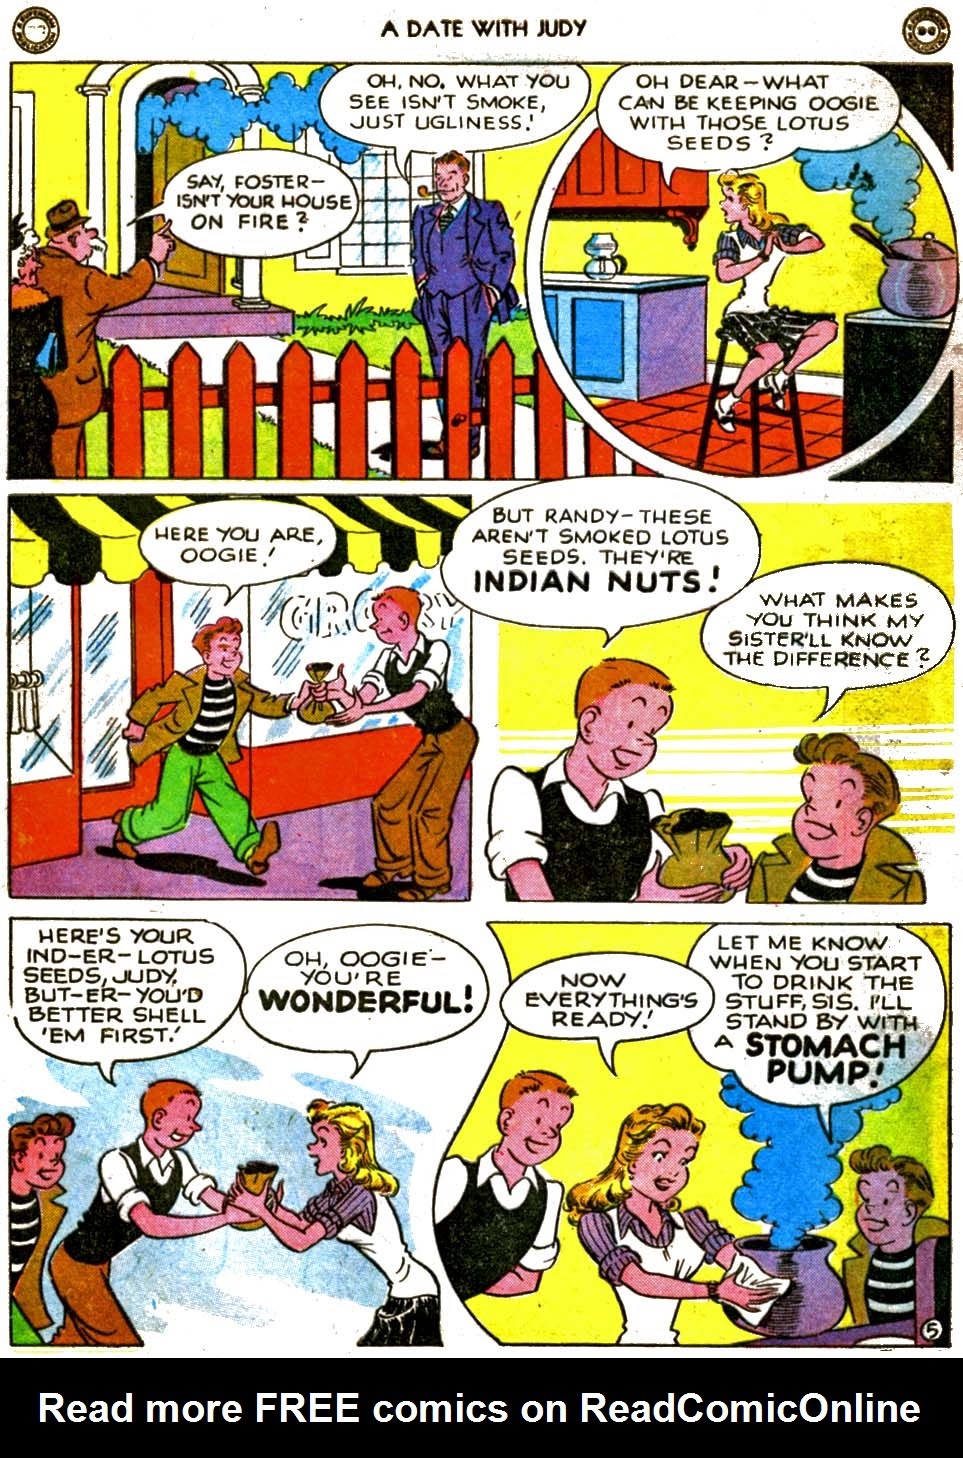 Read online A Date with Judy comic -  Issue #1 - 46